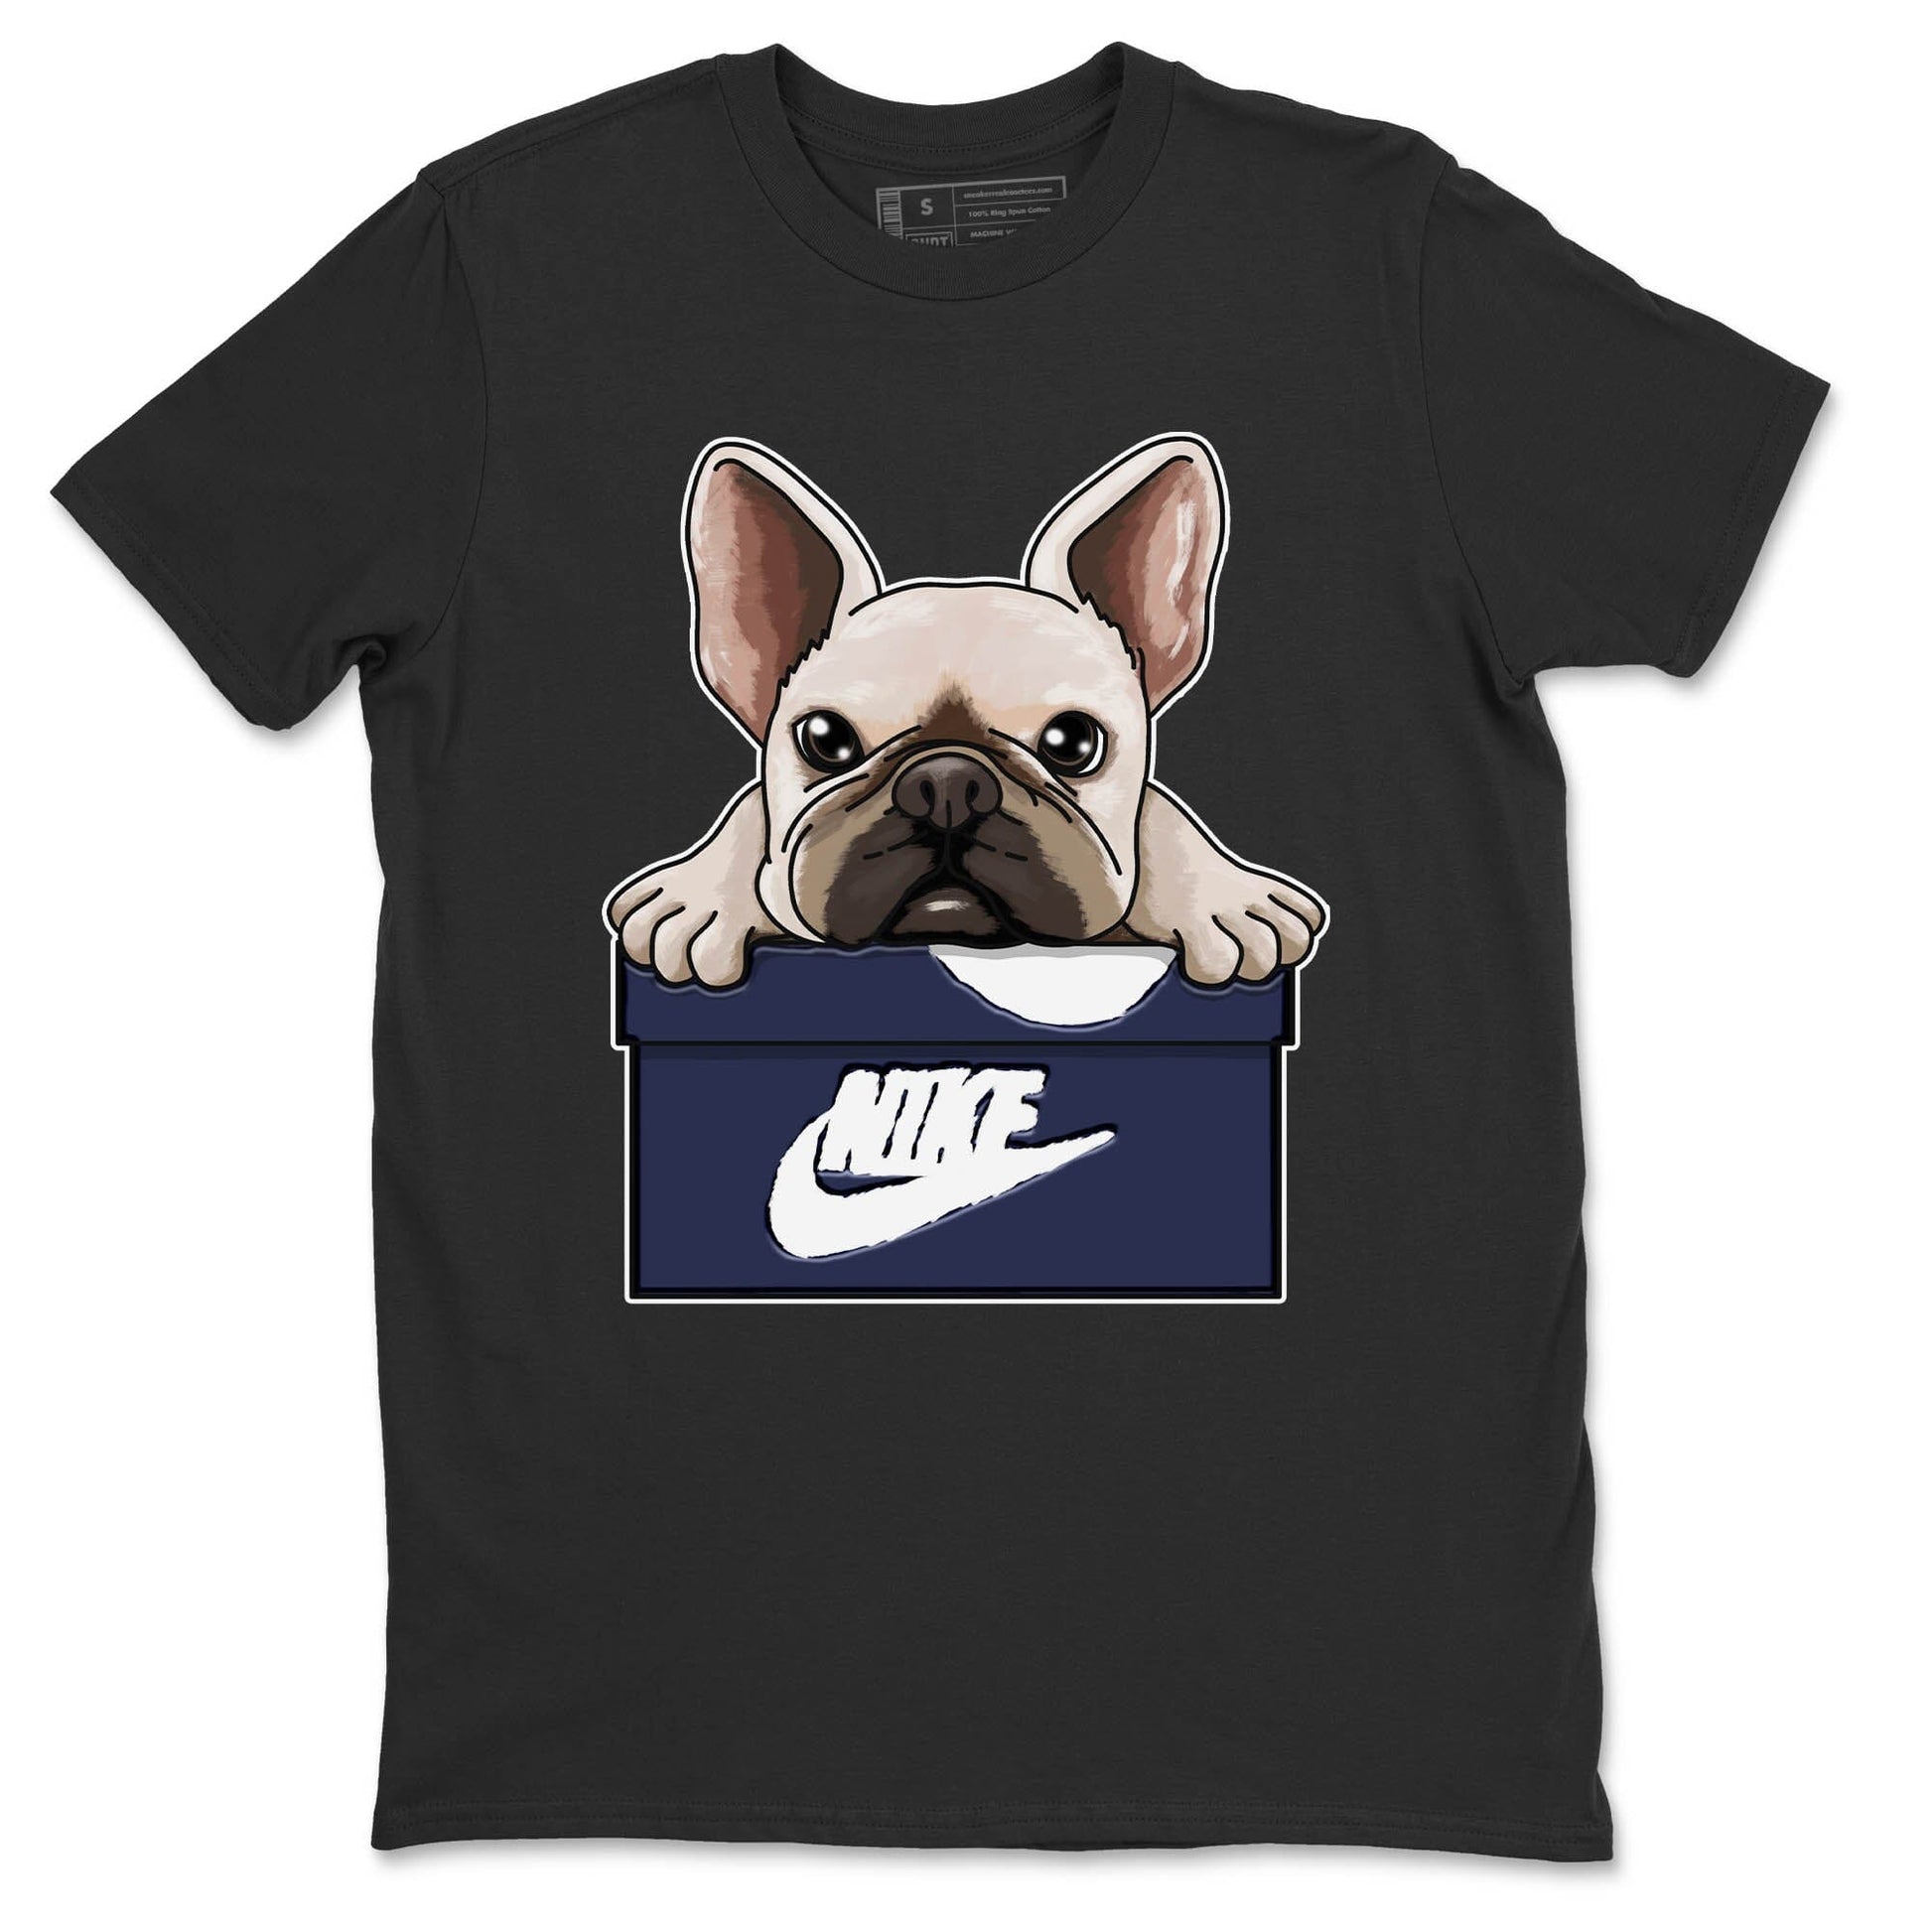 Jordan 11 Midnight Navy Sneaker Match Tees French Bulldog Sneaker Tees Jordan 11 Midnight Navy Sneaker Release Tees Unisex Shirts